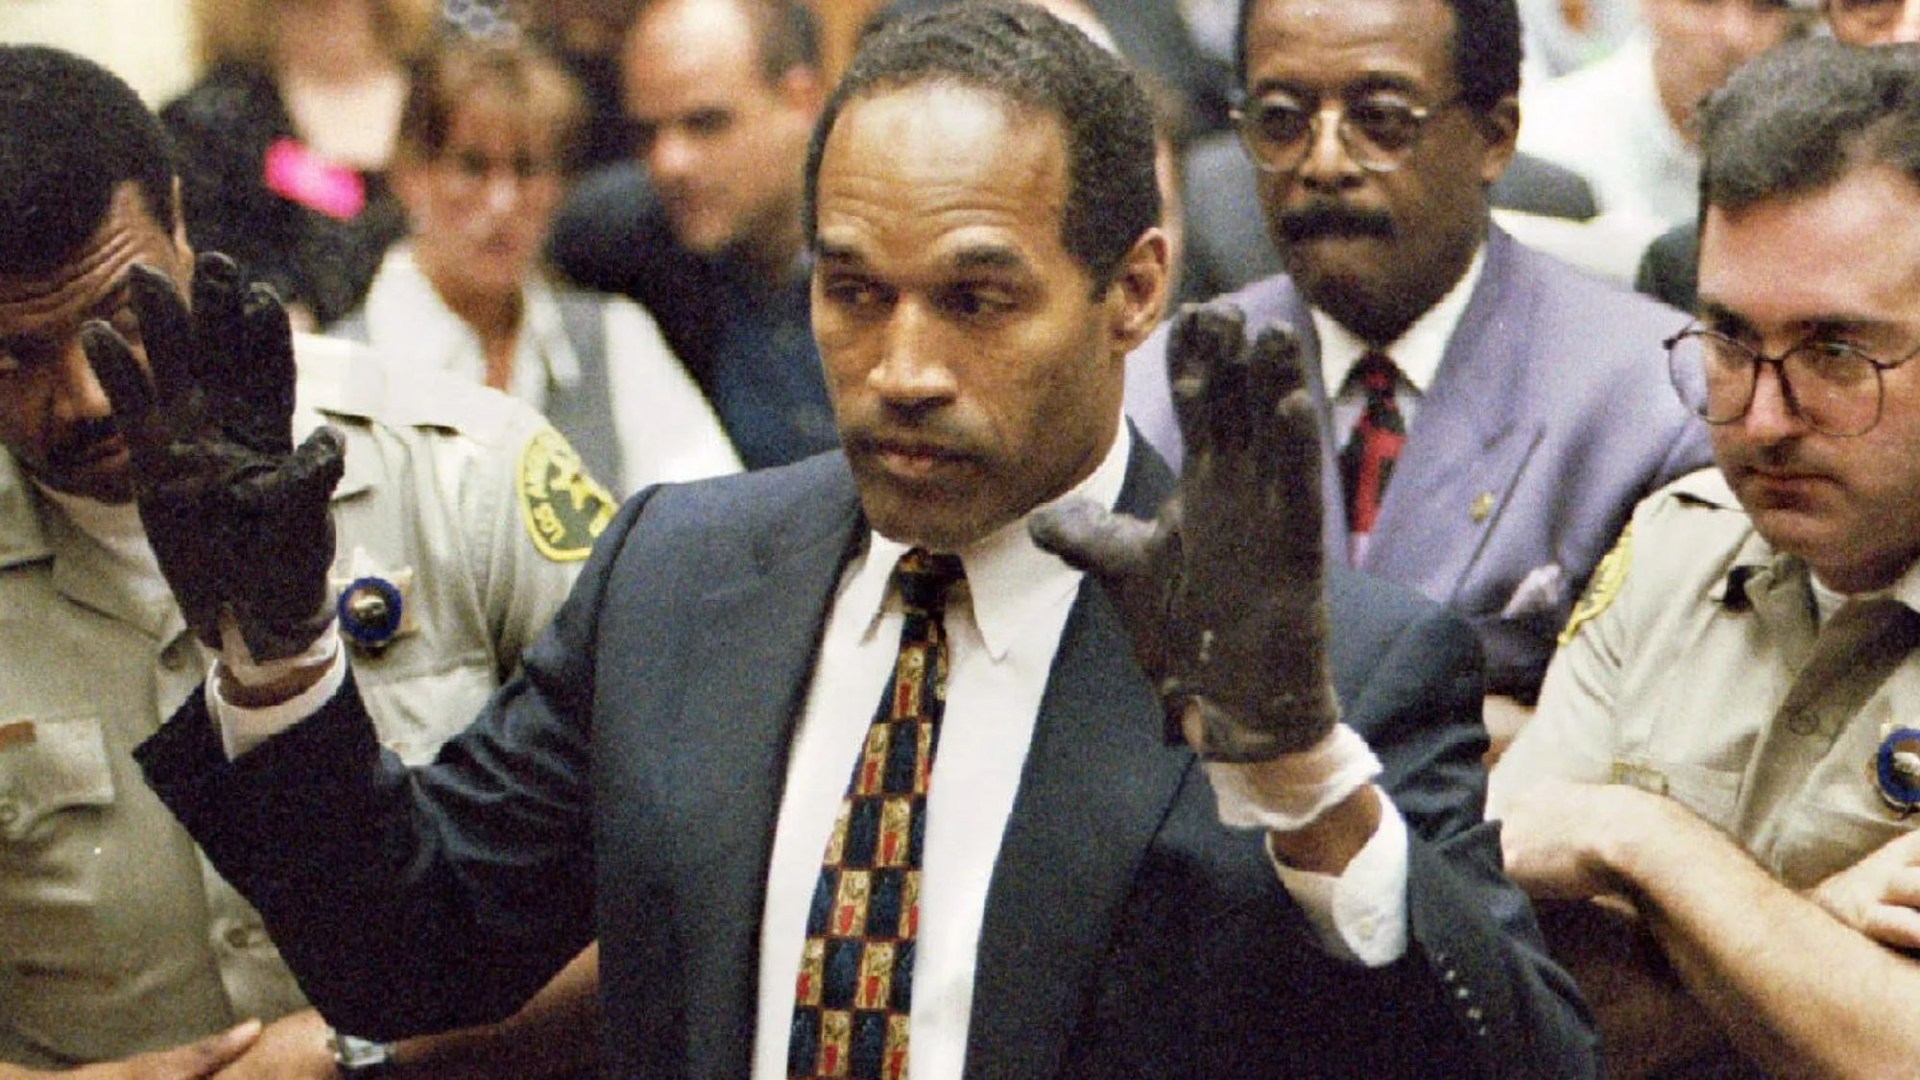 Surprising whereabouts of OJs infamous murder gloves revealed after NFL-star notoriously said they dont fit [Video]